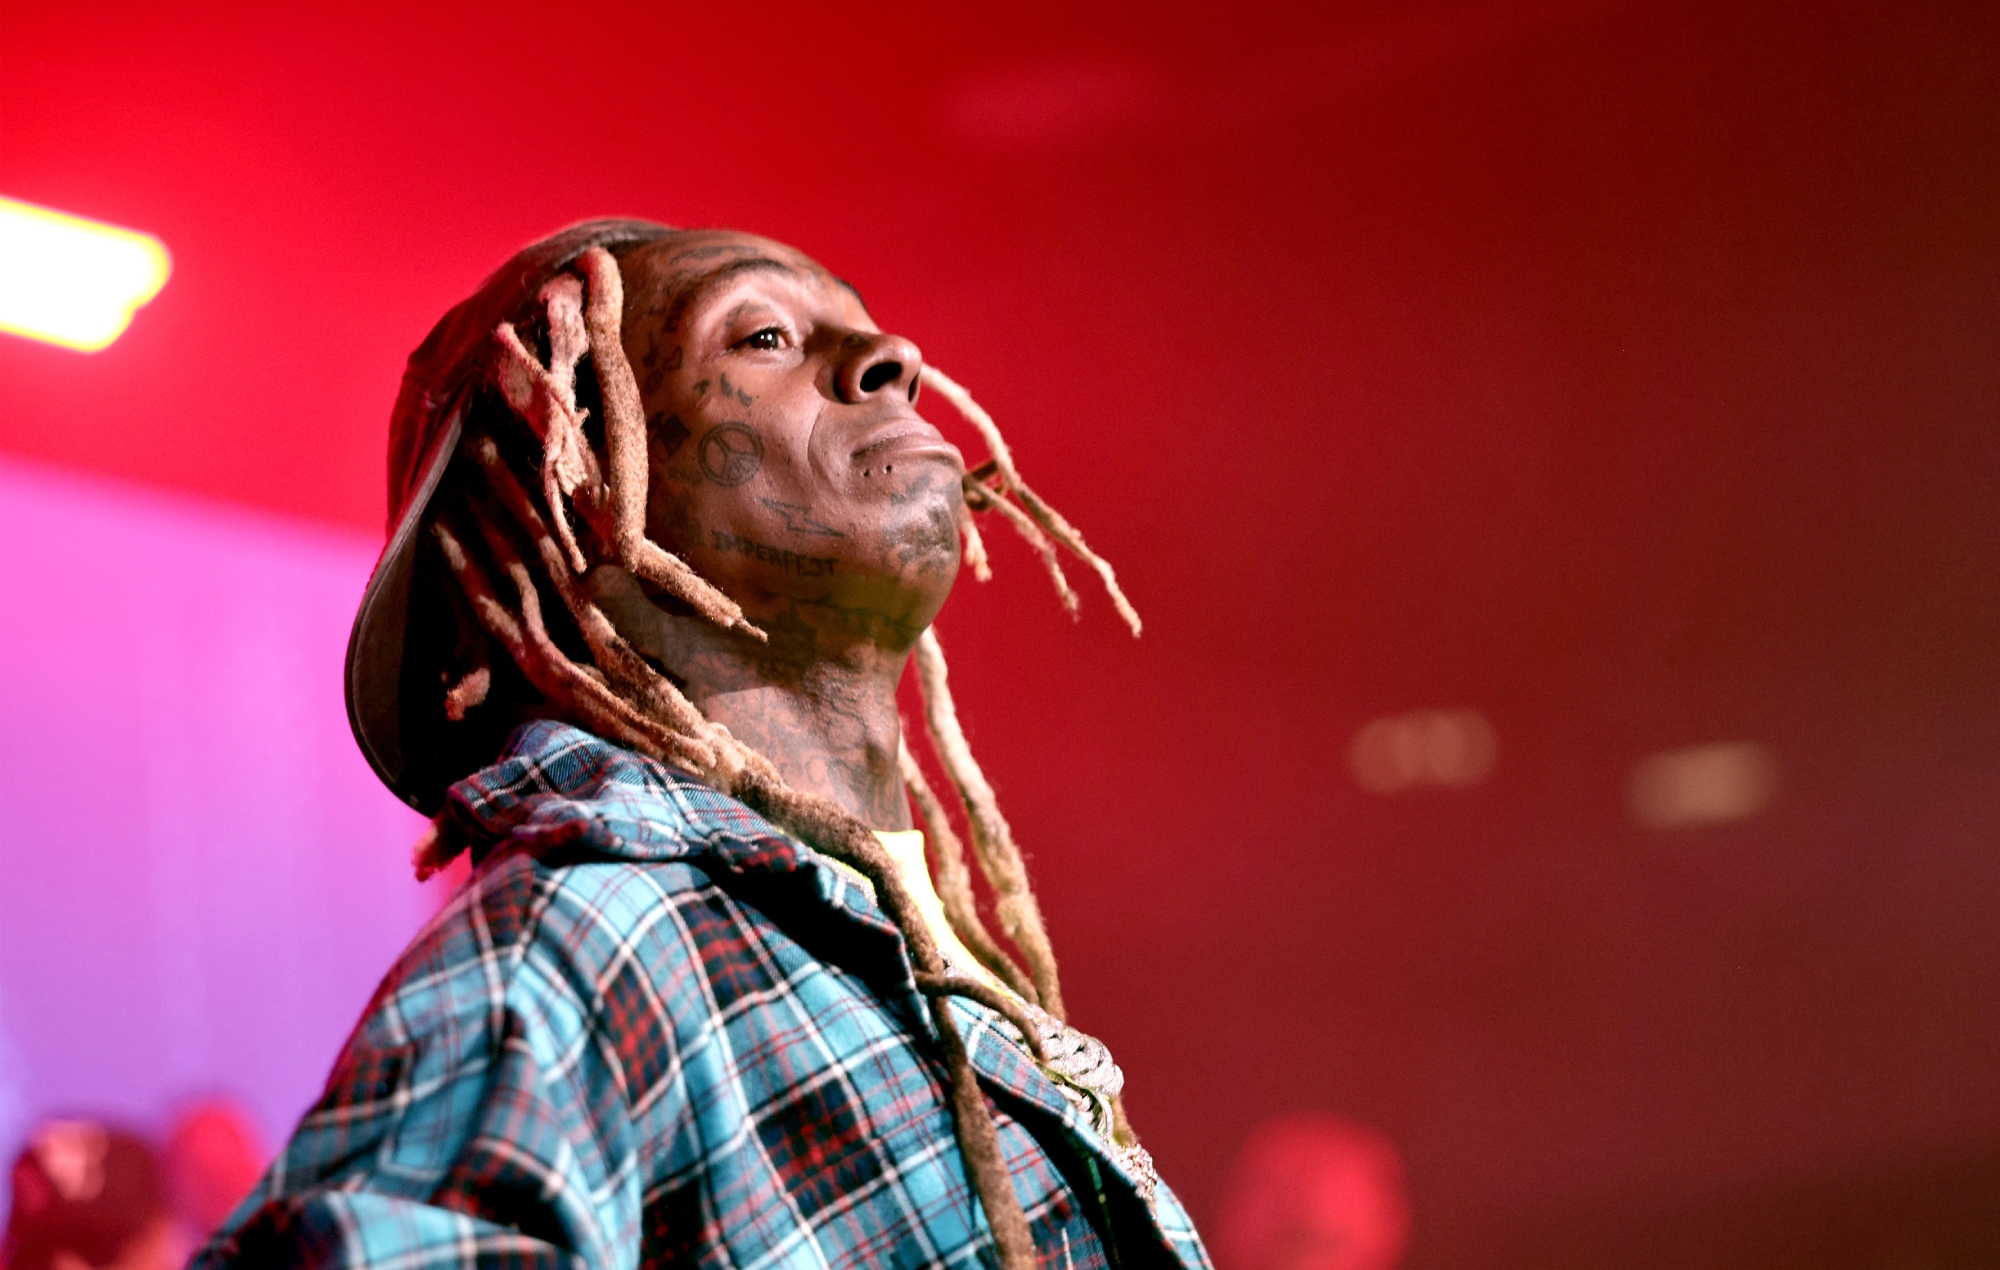 Lil Wayne hasn’t eaten fast food in 20 years: “I don’t know what McDonald’s smell like”